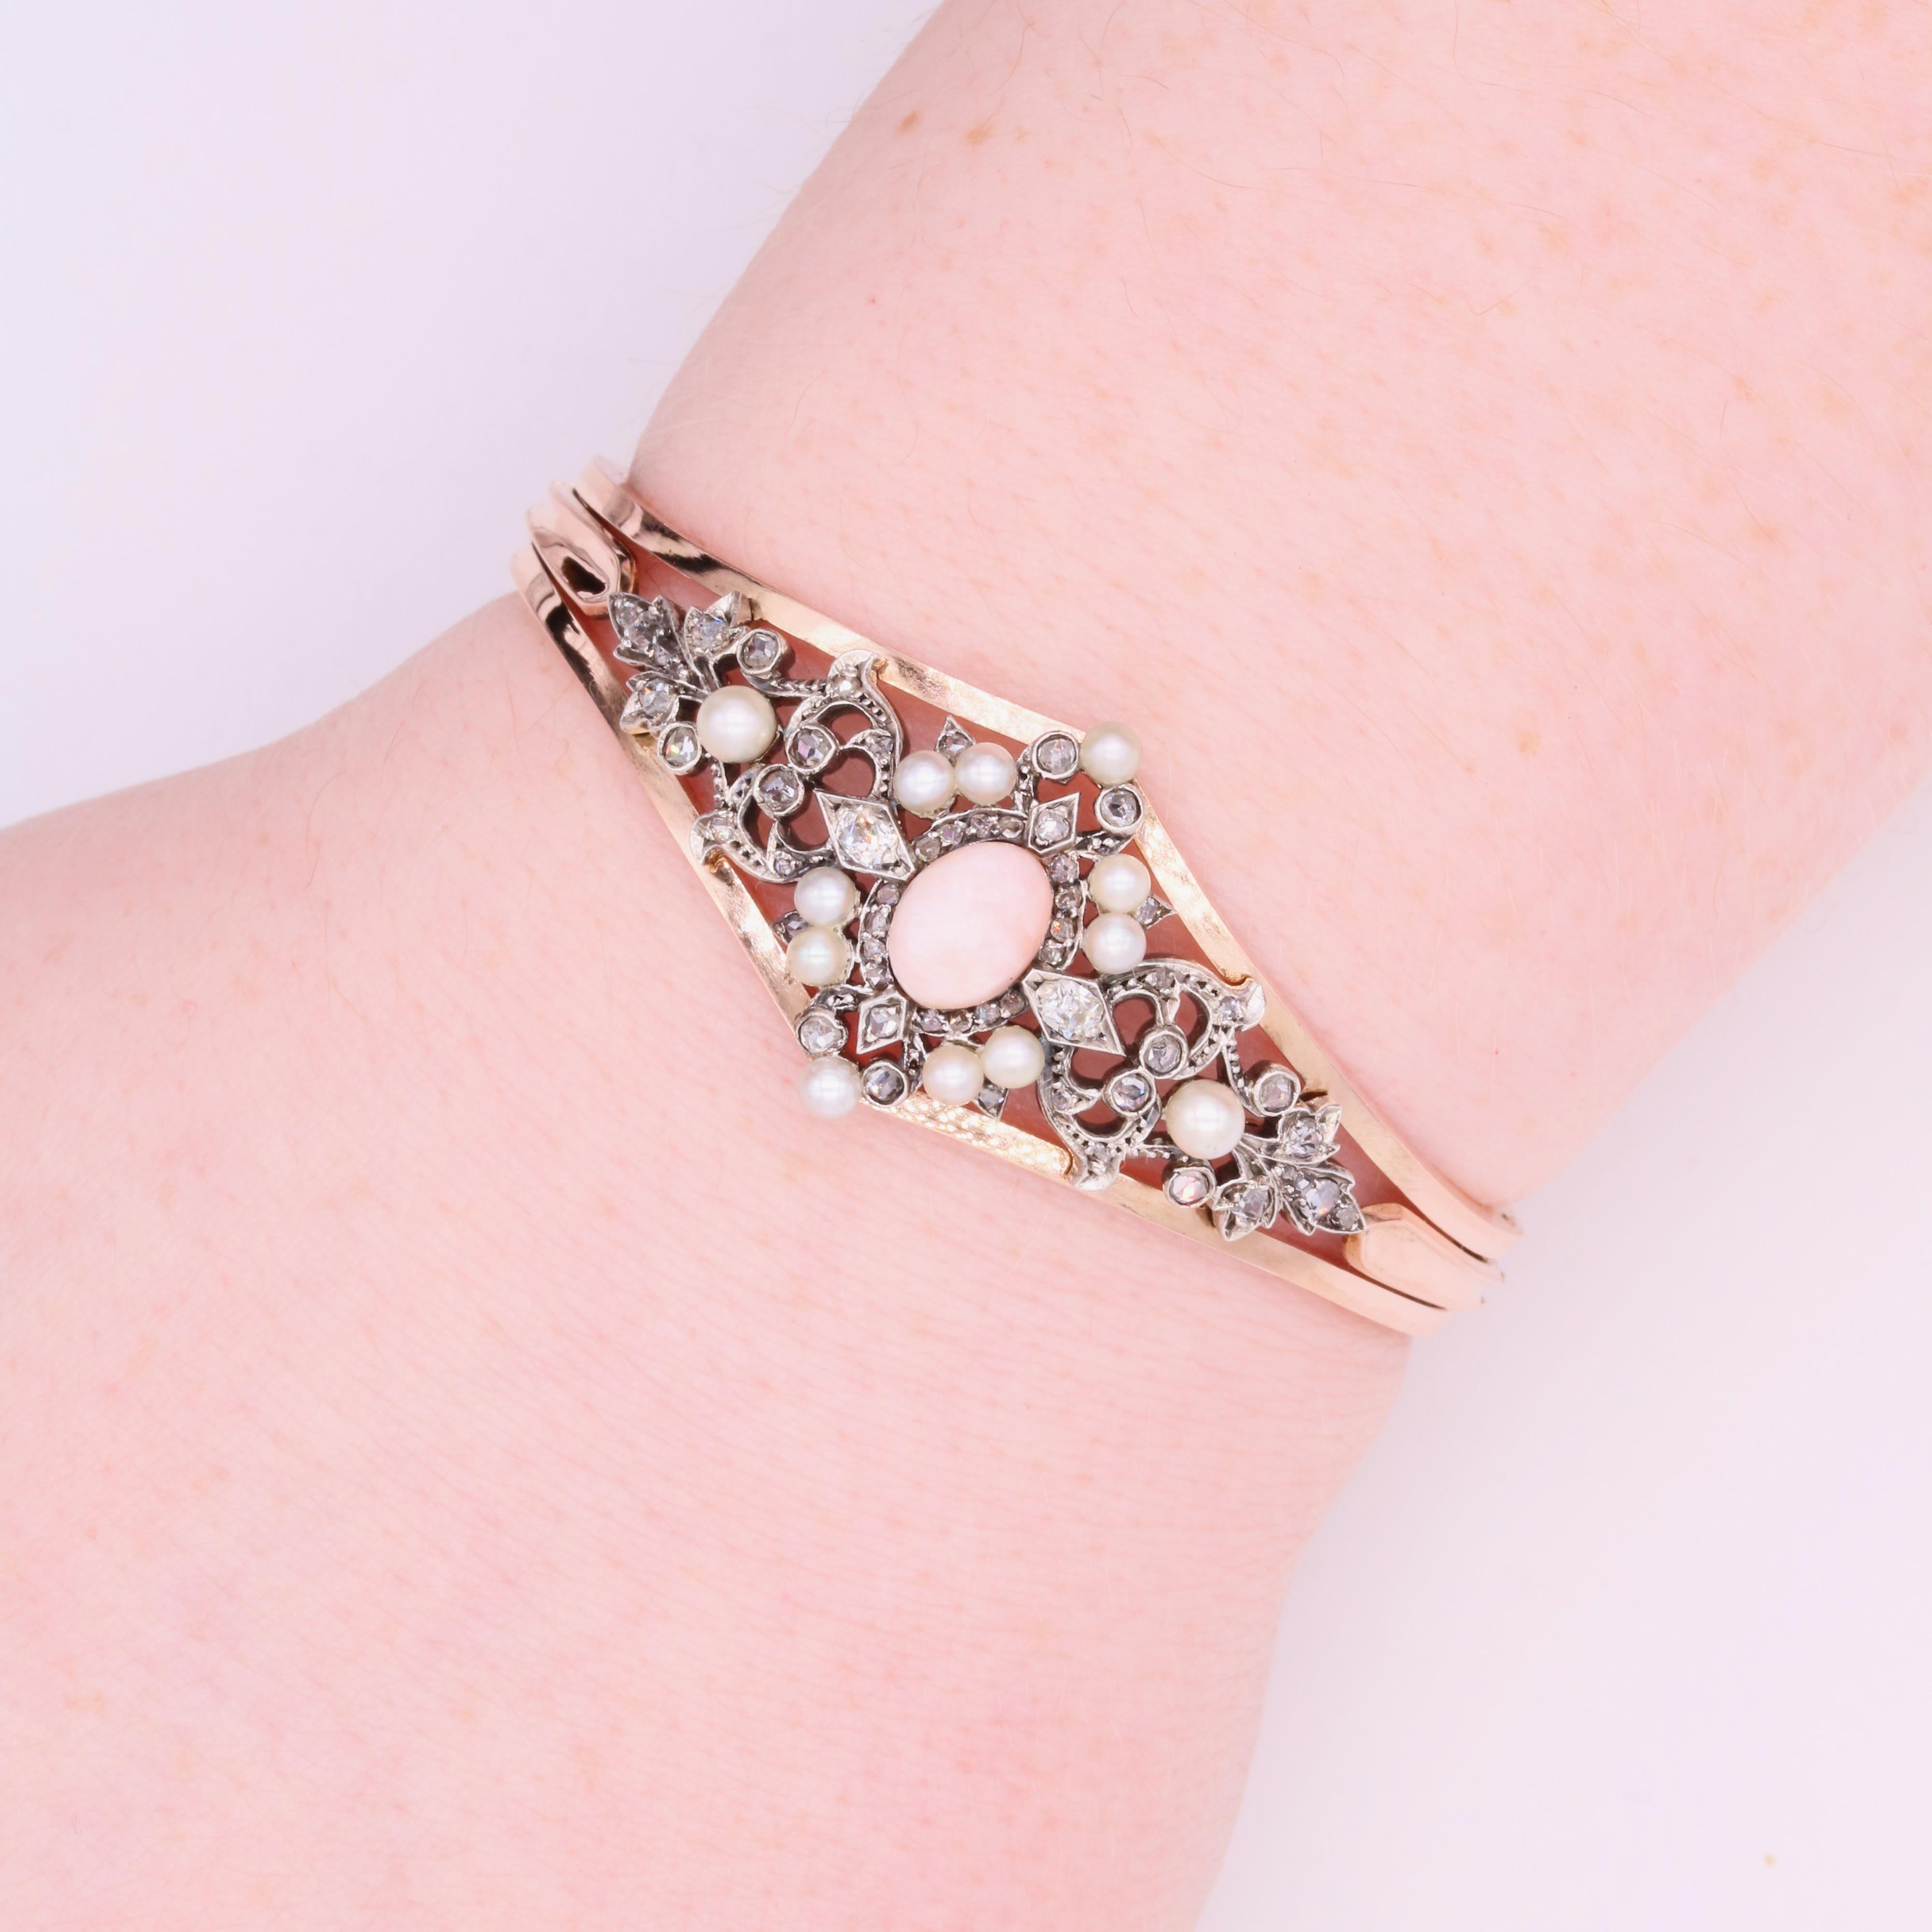 An antique rose gold, conch pearl, diamond, and pearl bracelet, comprising one oval pink conch pearl, ten seed pearls, two old mine cut diamonds, and fifty-four rose cut diamonds, set in silver, with the bracelet in 18 karat rose gold.  

The